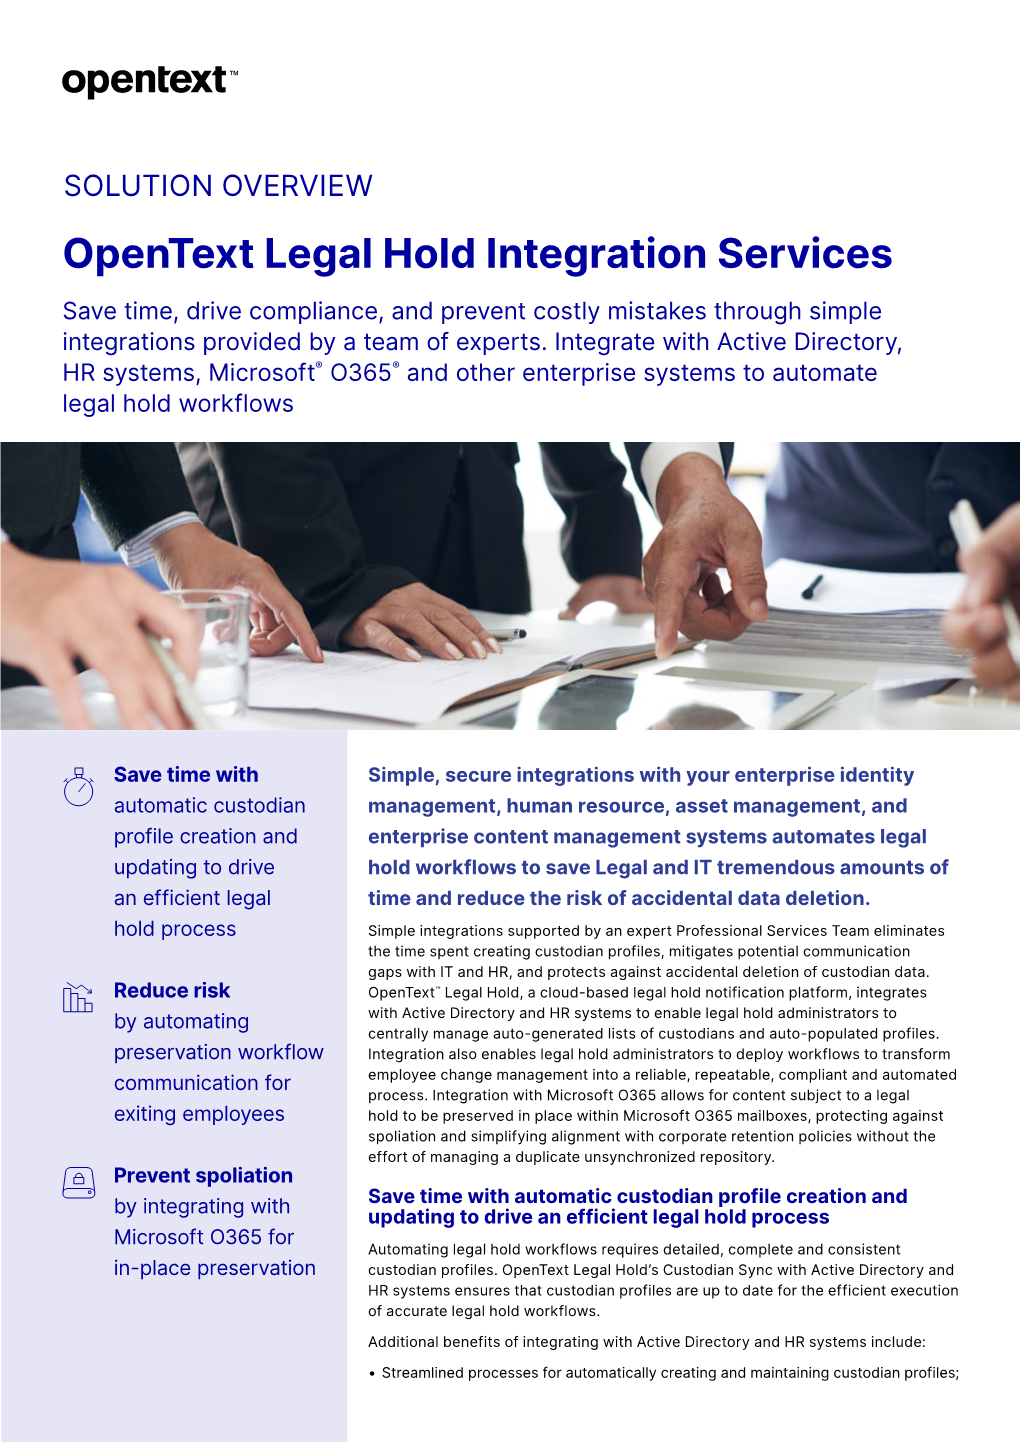 Opentext Legal Hold Integration Services Solution Overview